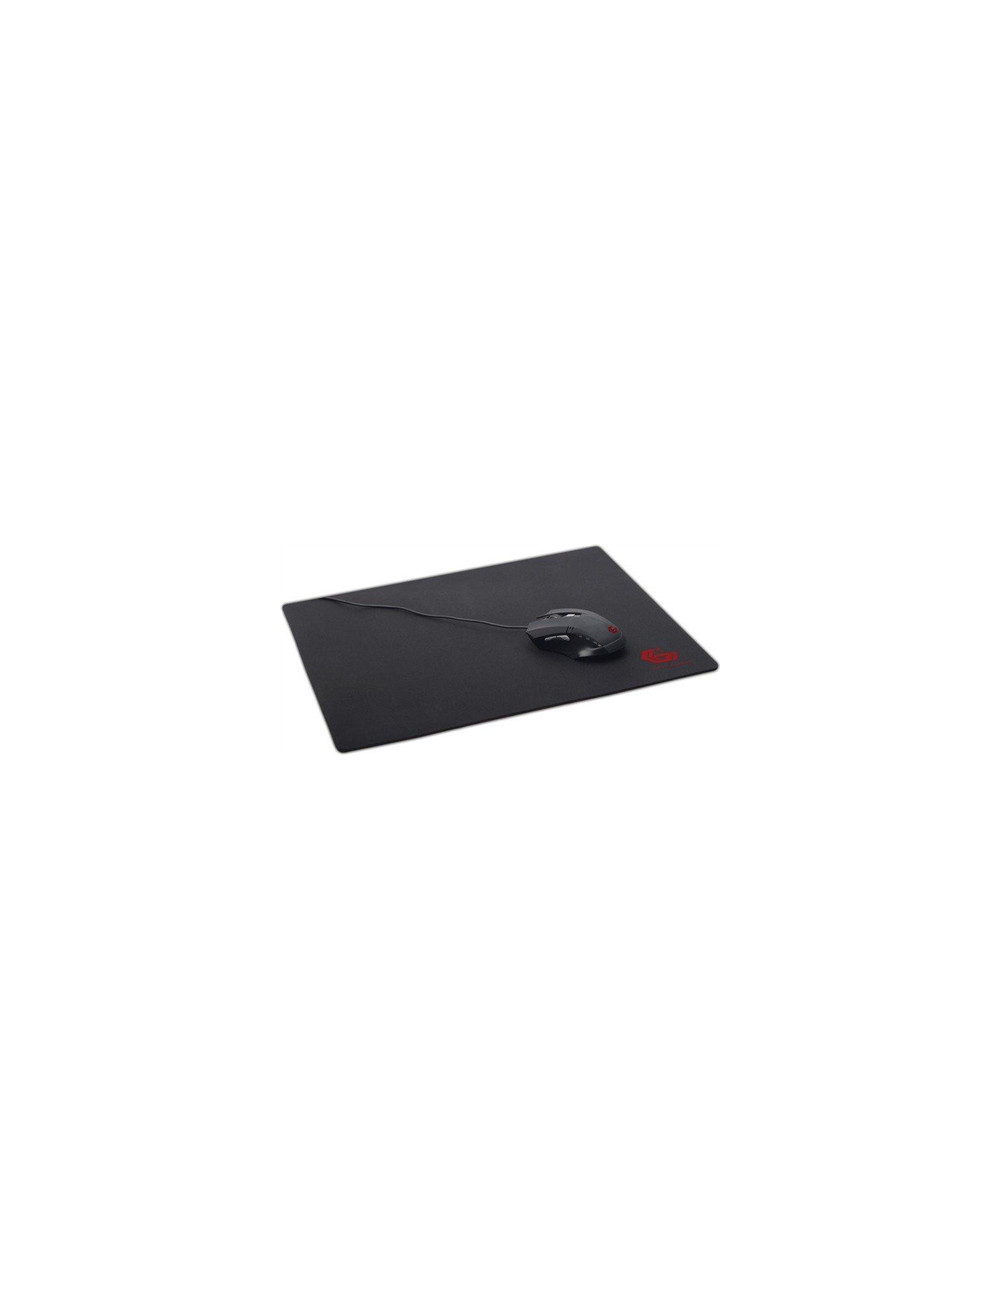 Gembird MP-GAME-L Gaming mouse pad, large 400 x 450 mm